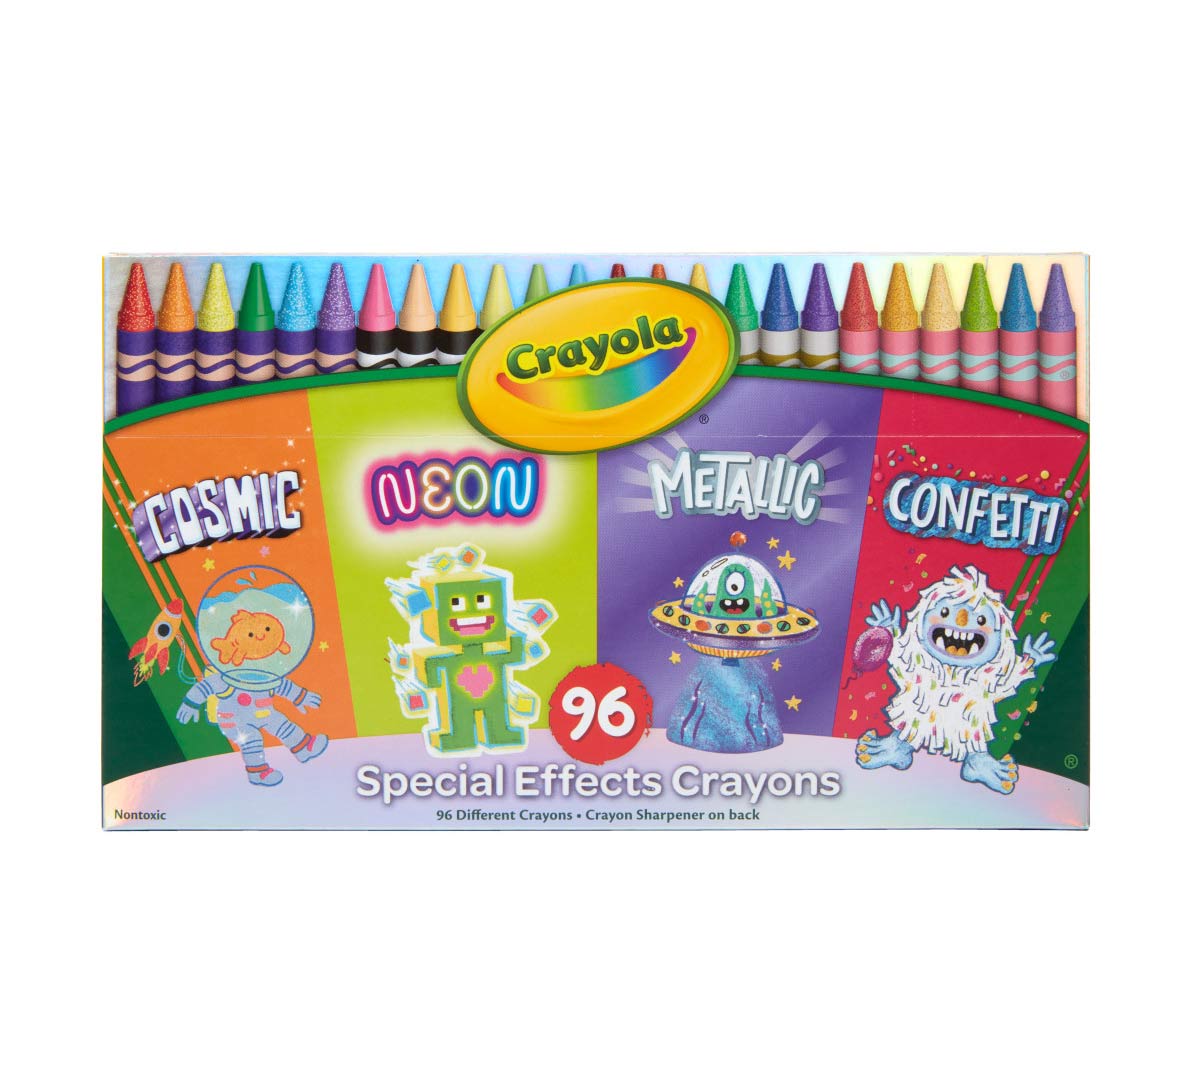 https://shop.crayola.com/on/demandware.static/-/Sites-crayola-storefront/default/dw3b576142/images/52-3462-0-200_Crayons_Special-Effects_96ct_F1.jpg